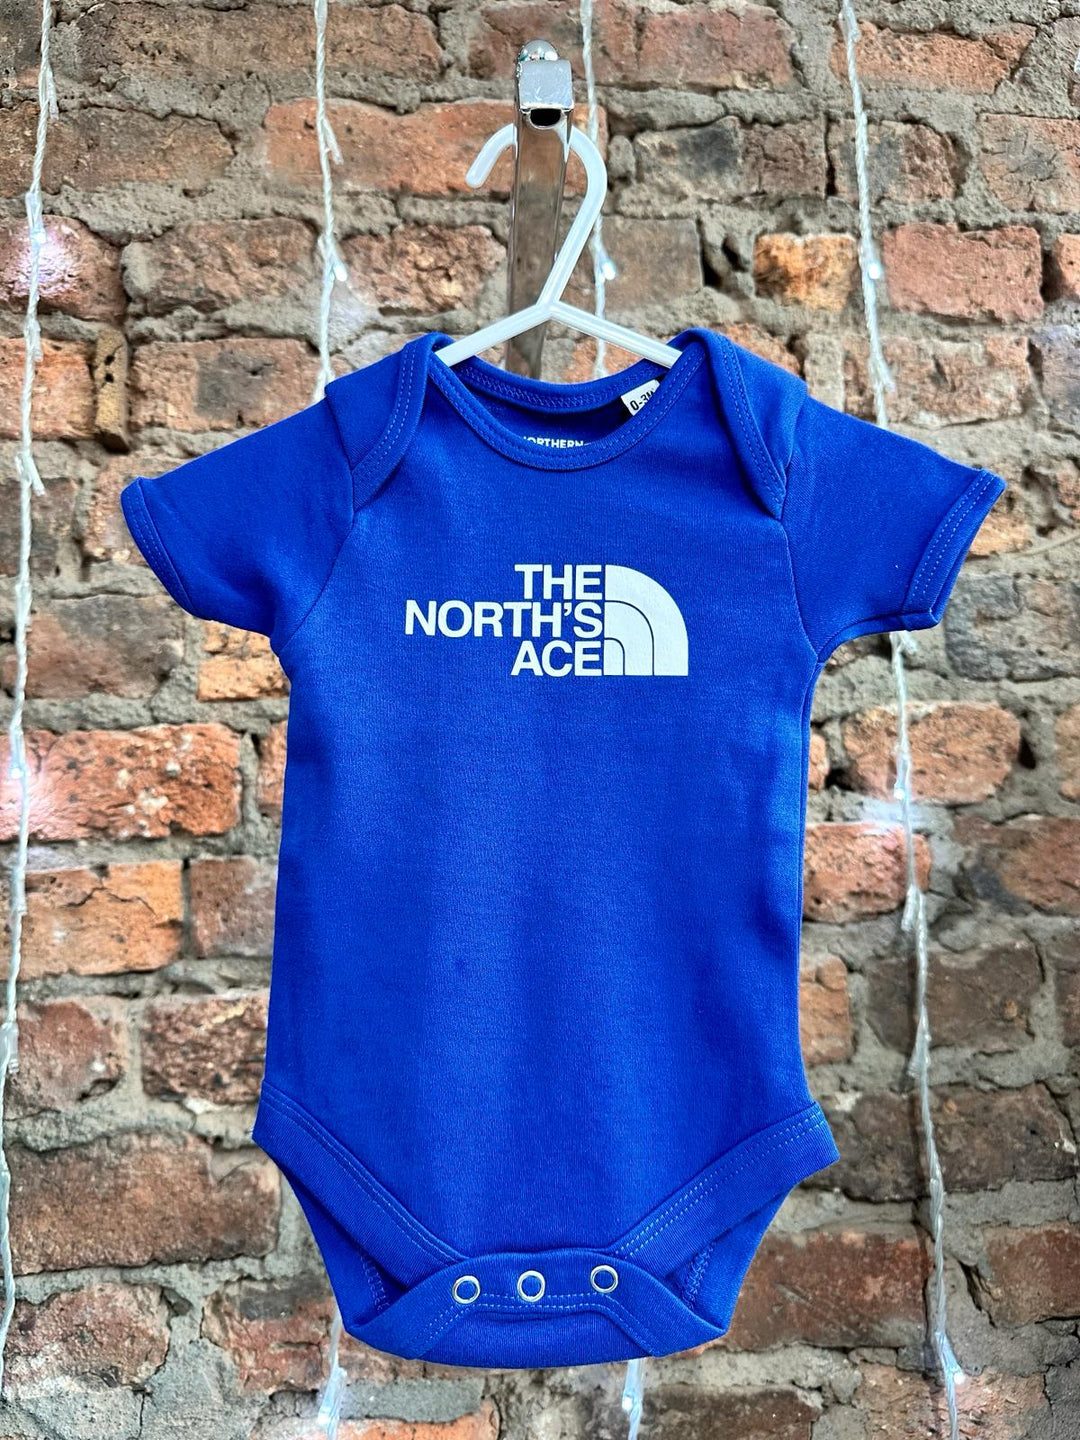 *The North's Ace Baby Vest